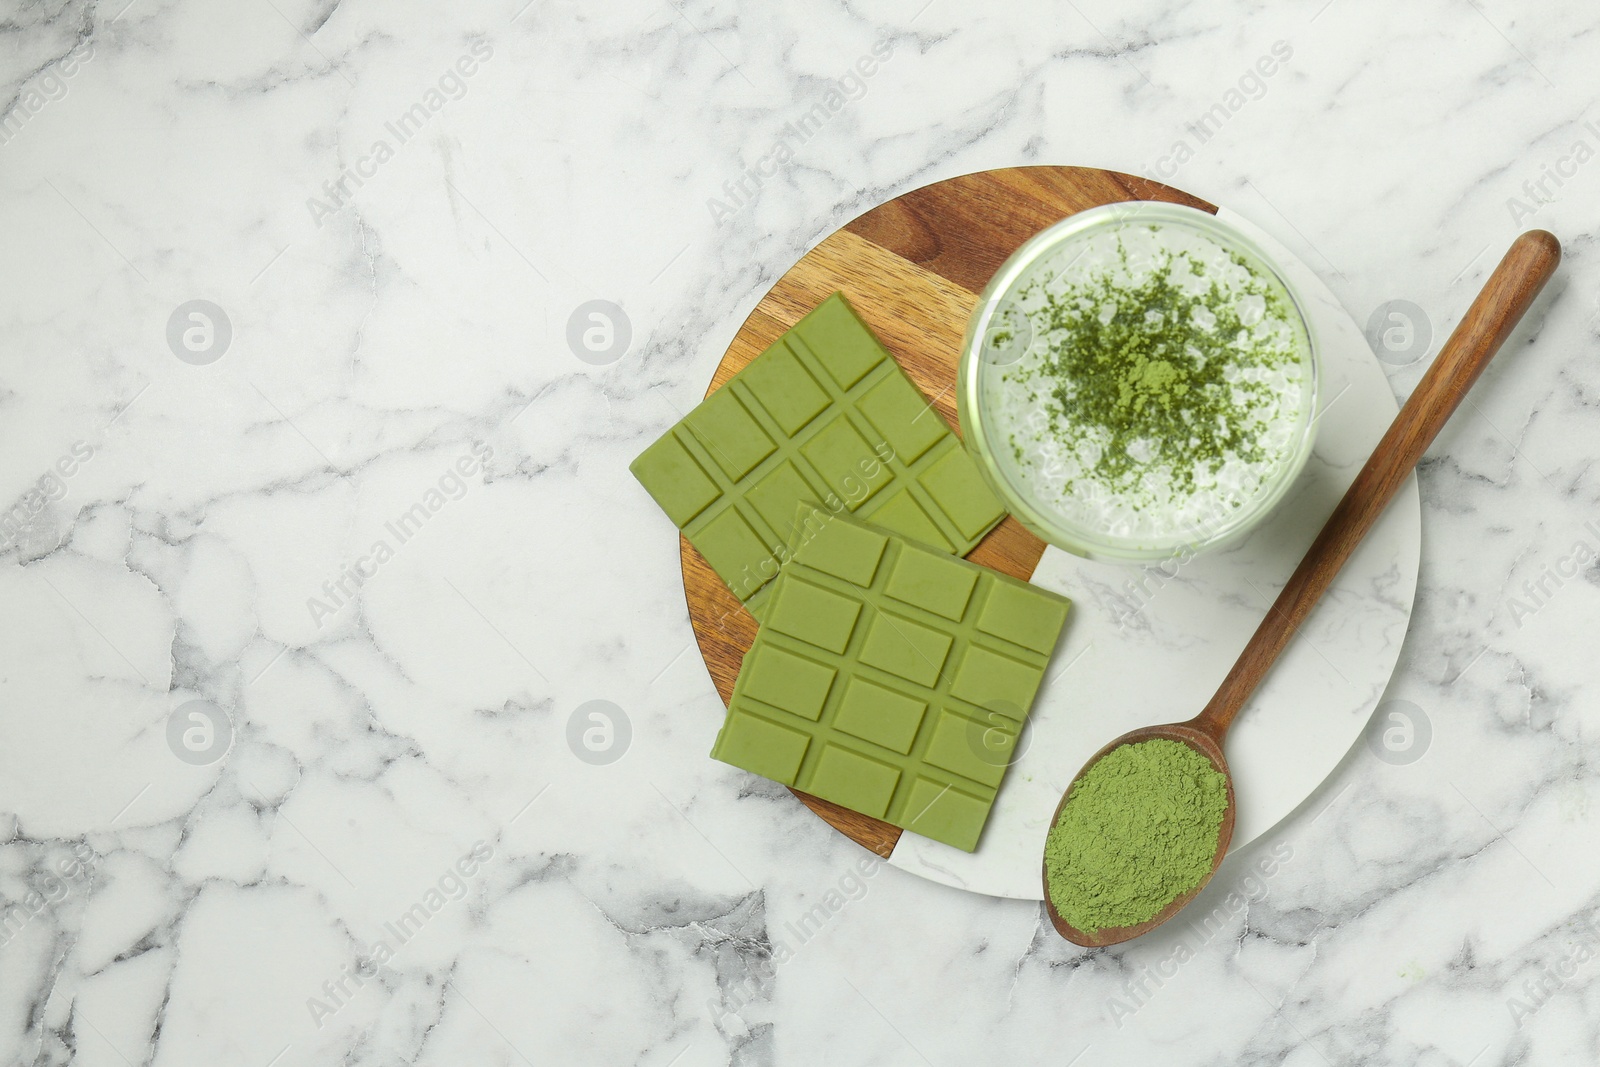 Photo of Pieces of tasty matcha chocolate bar, drink and powder on white marble table, top view. Space for text